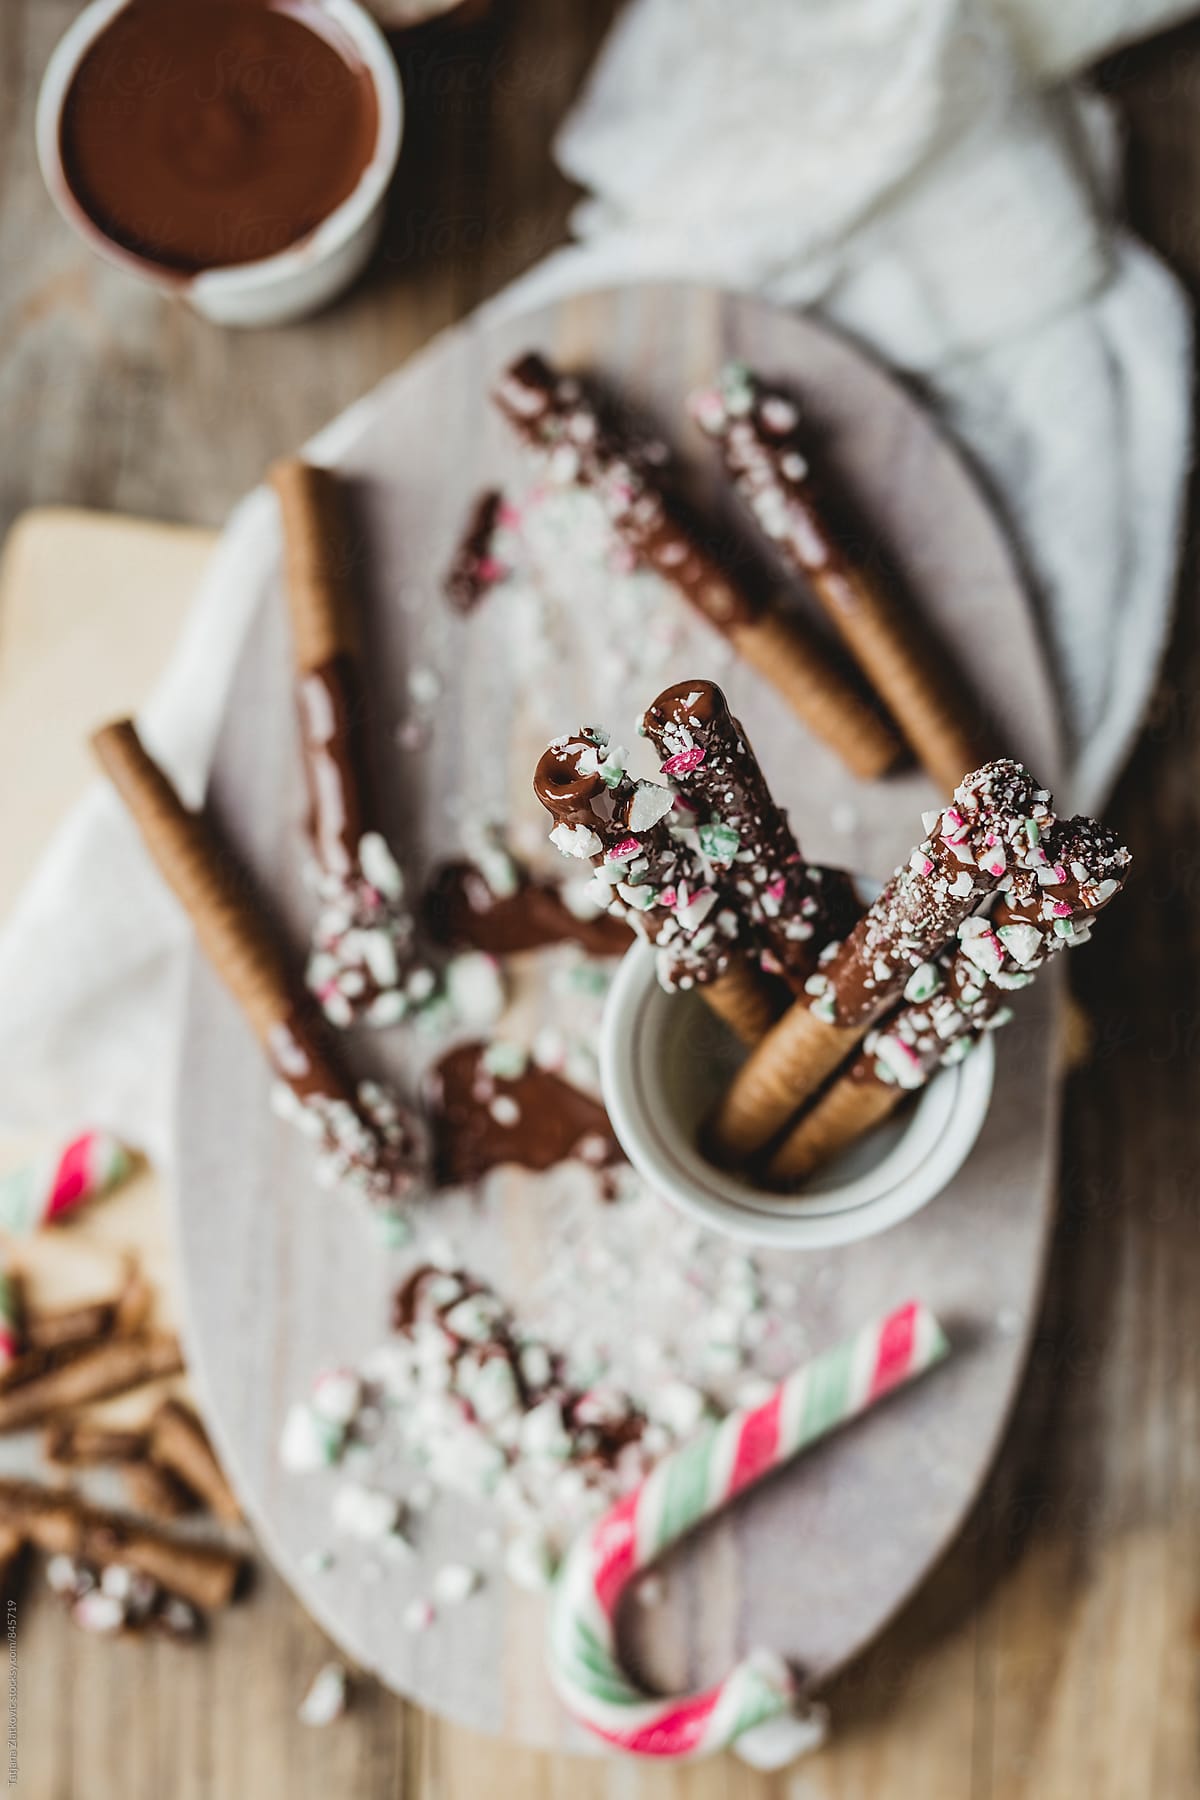 "Cigarette Cookies With Chocolate And Christmas Candies" by Stocksy ...